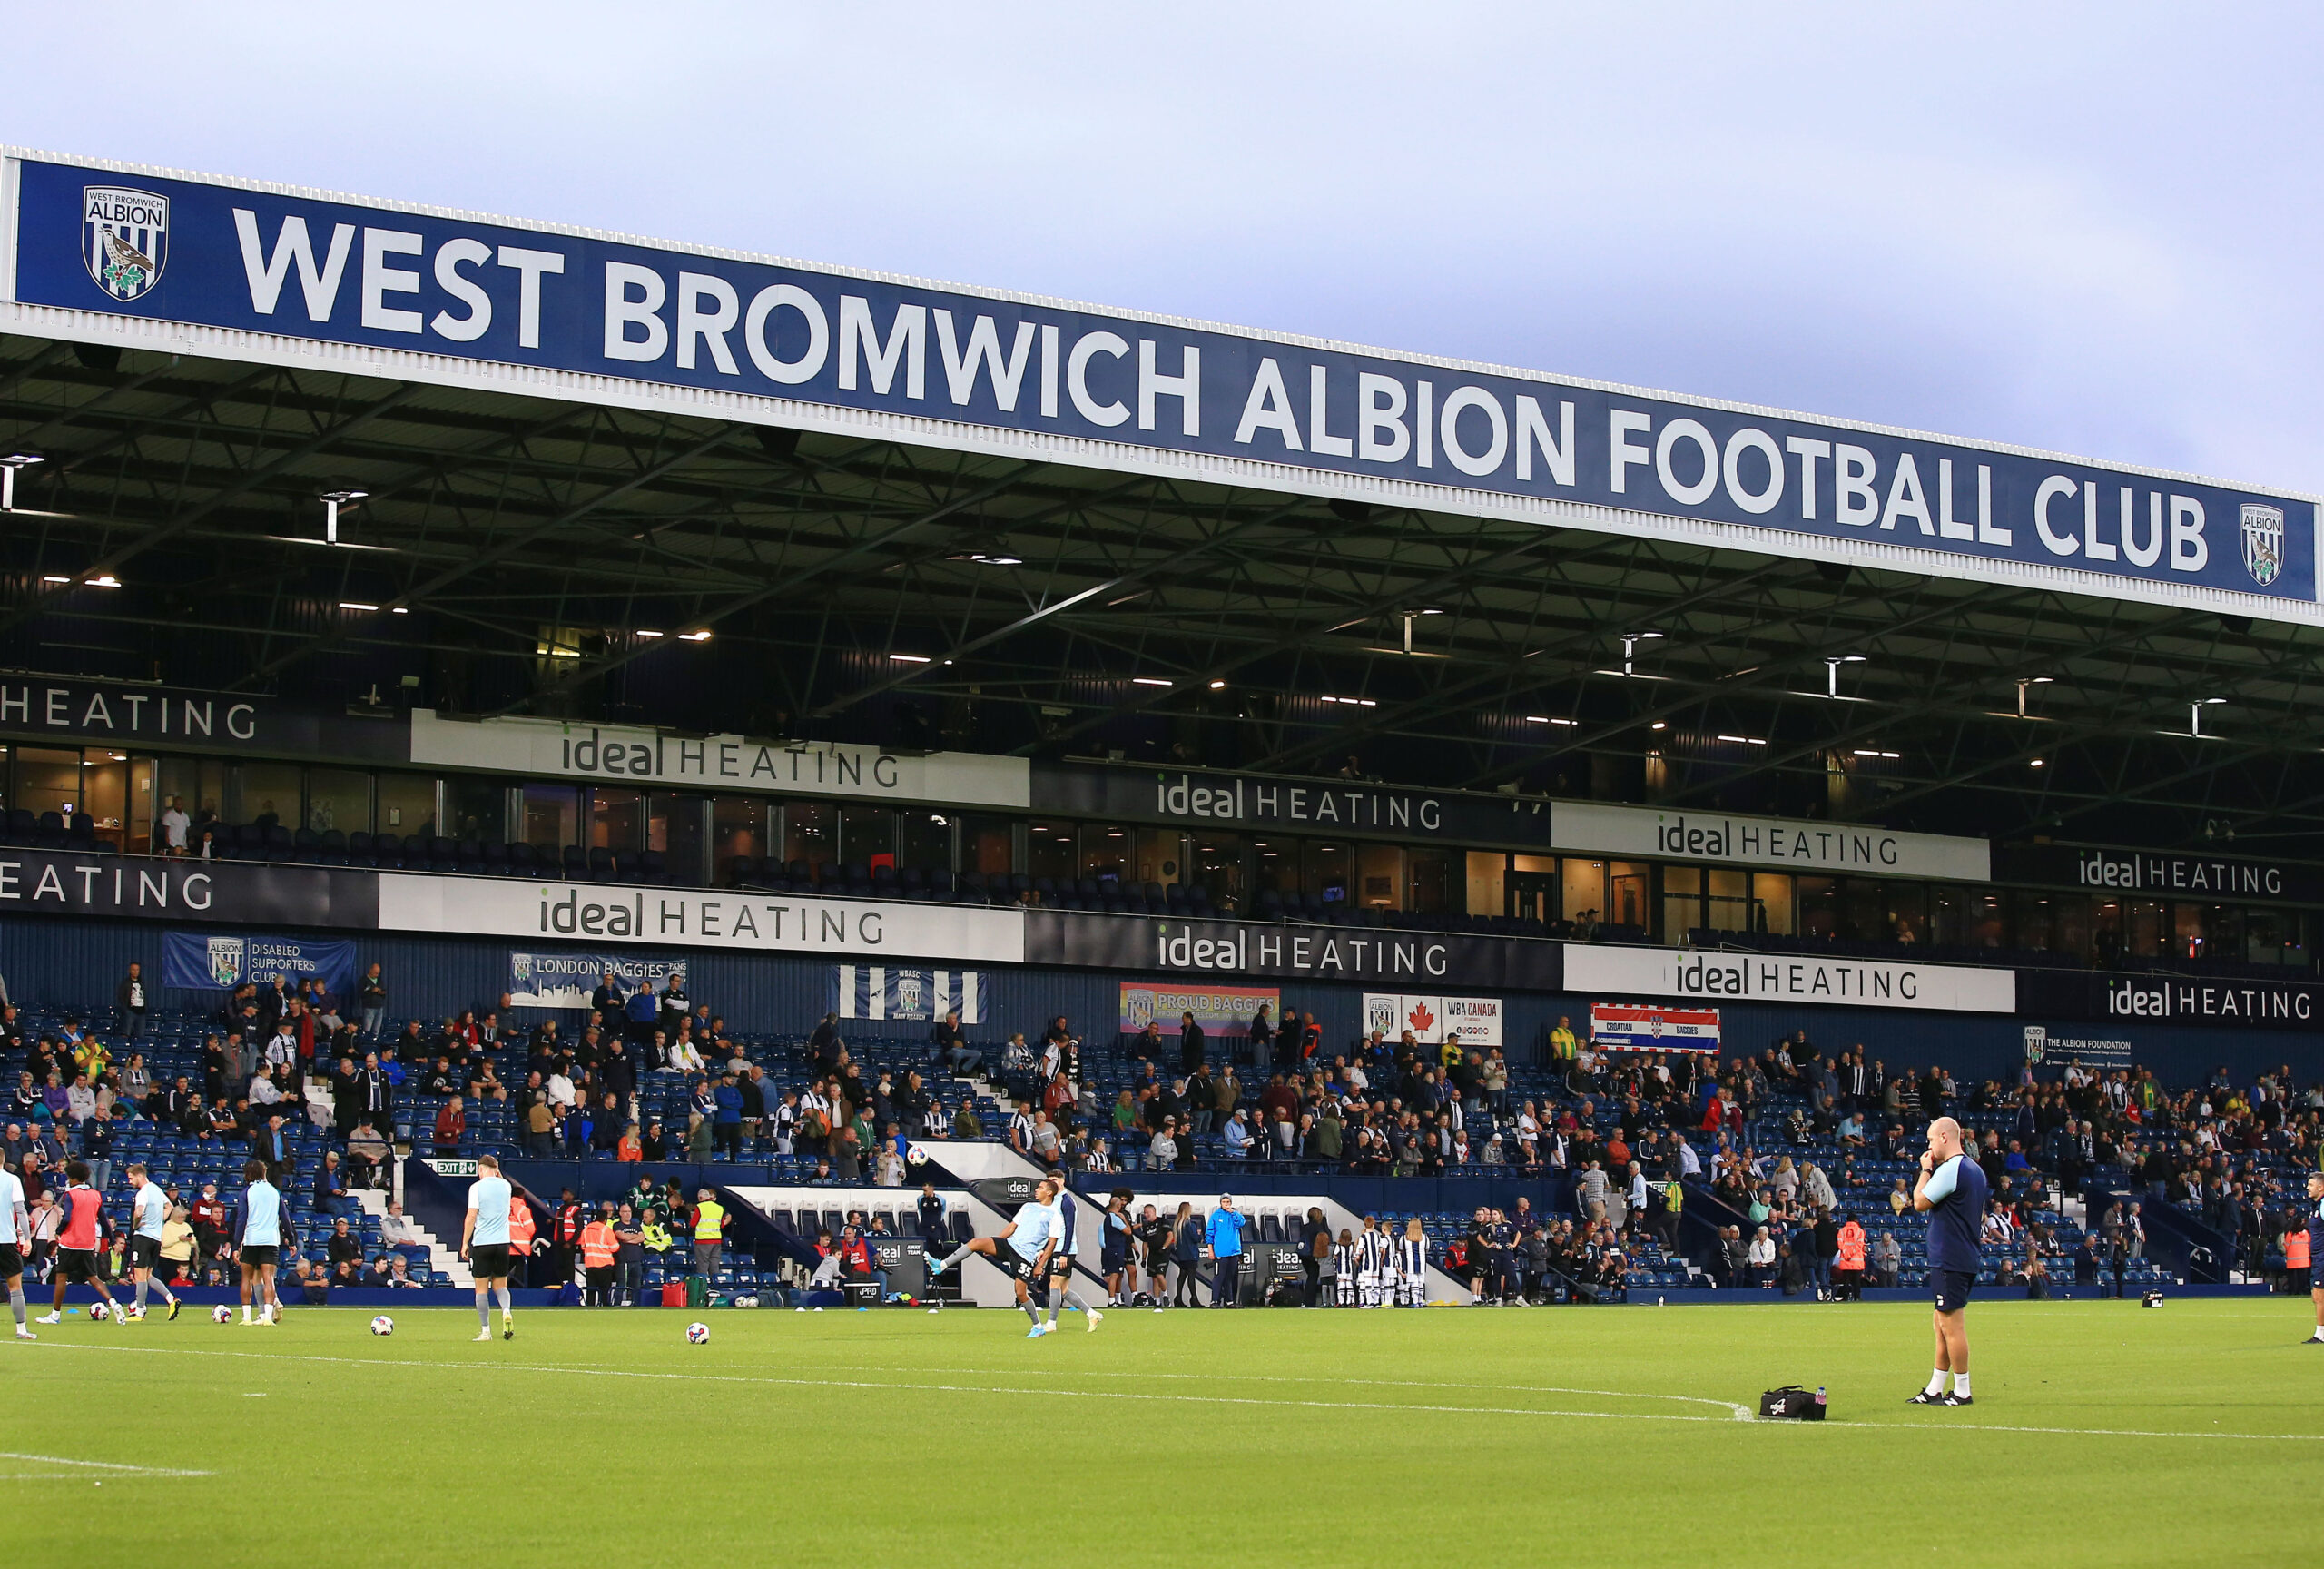 According to BBC reporter: West Brom are set for a cash boost as £130m deal is set to come amid financial pressure at The Hawthorns……